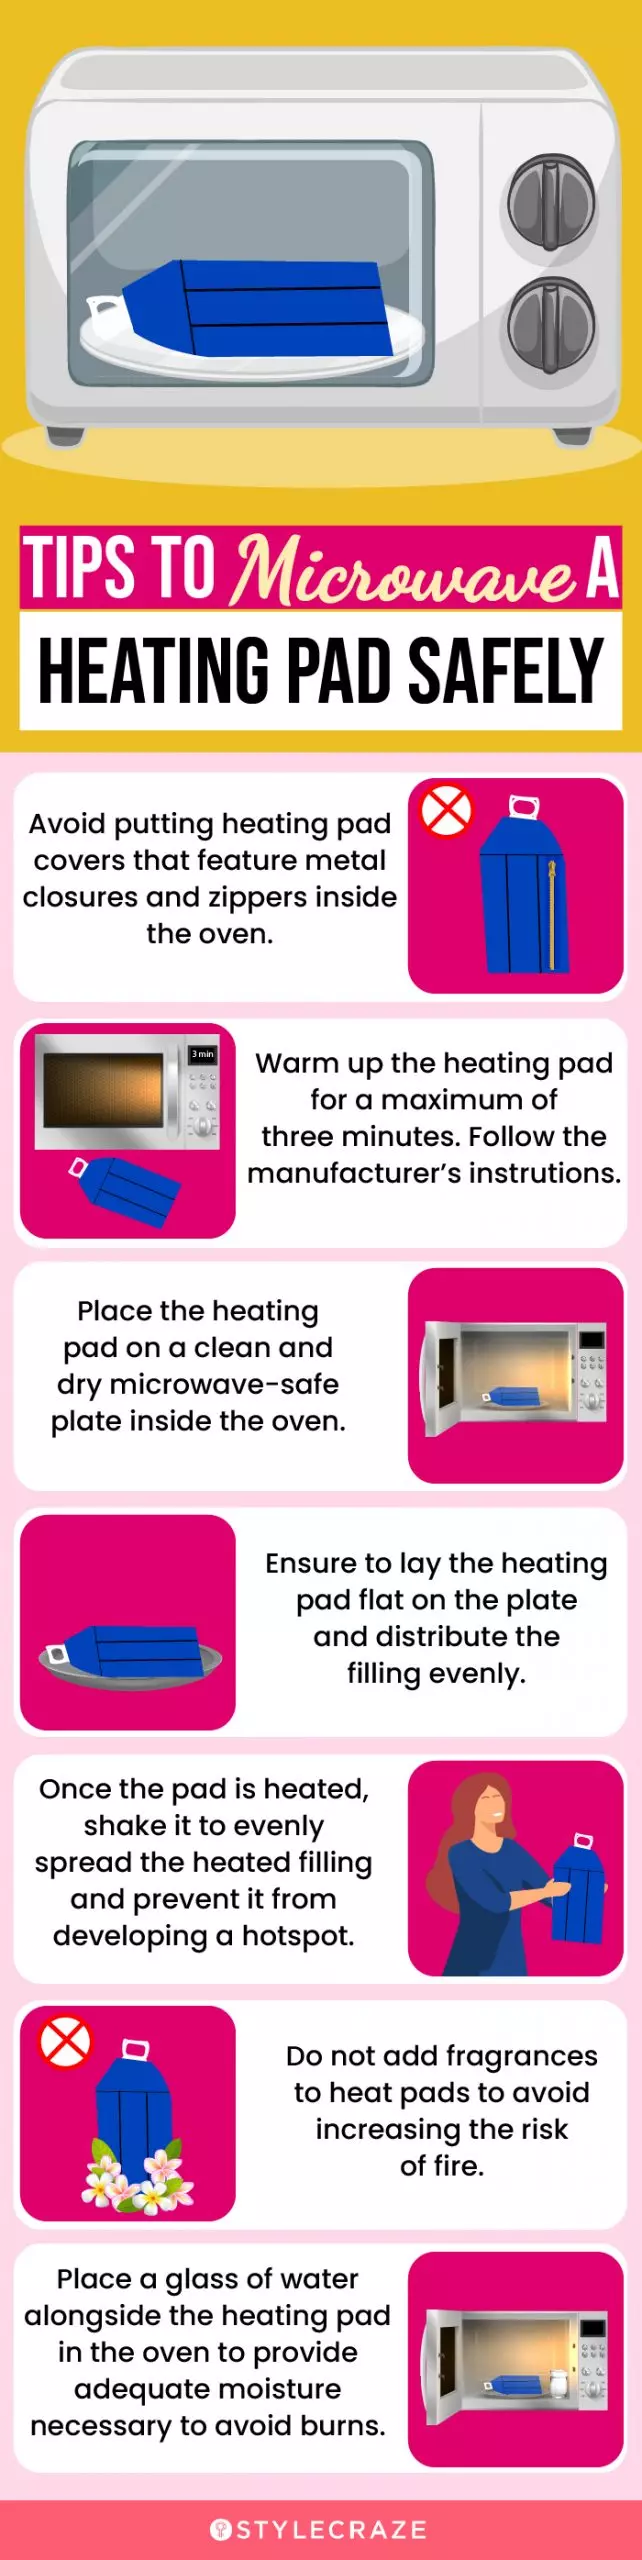 Tips To Microwave A Heating Pad Safely (infographic)